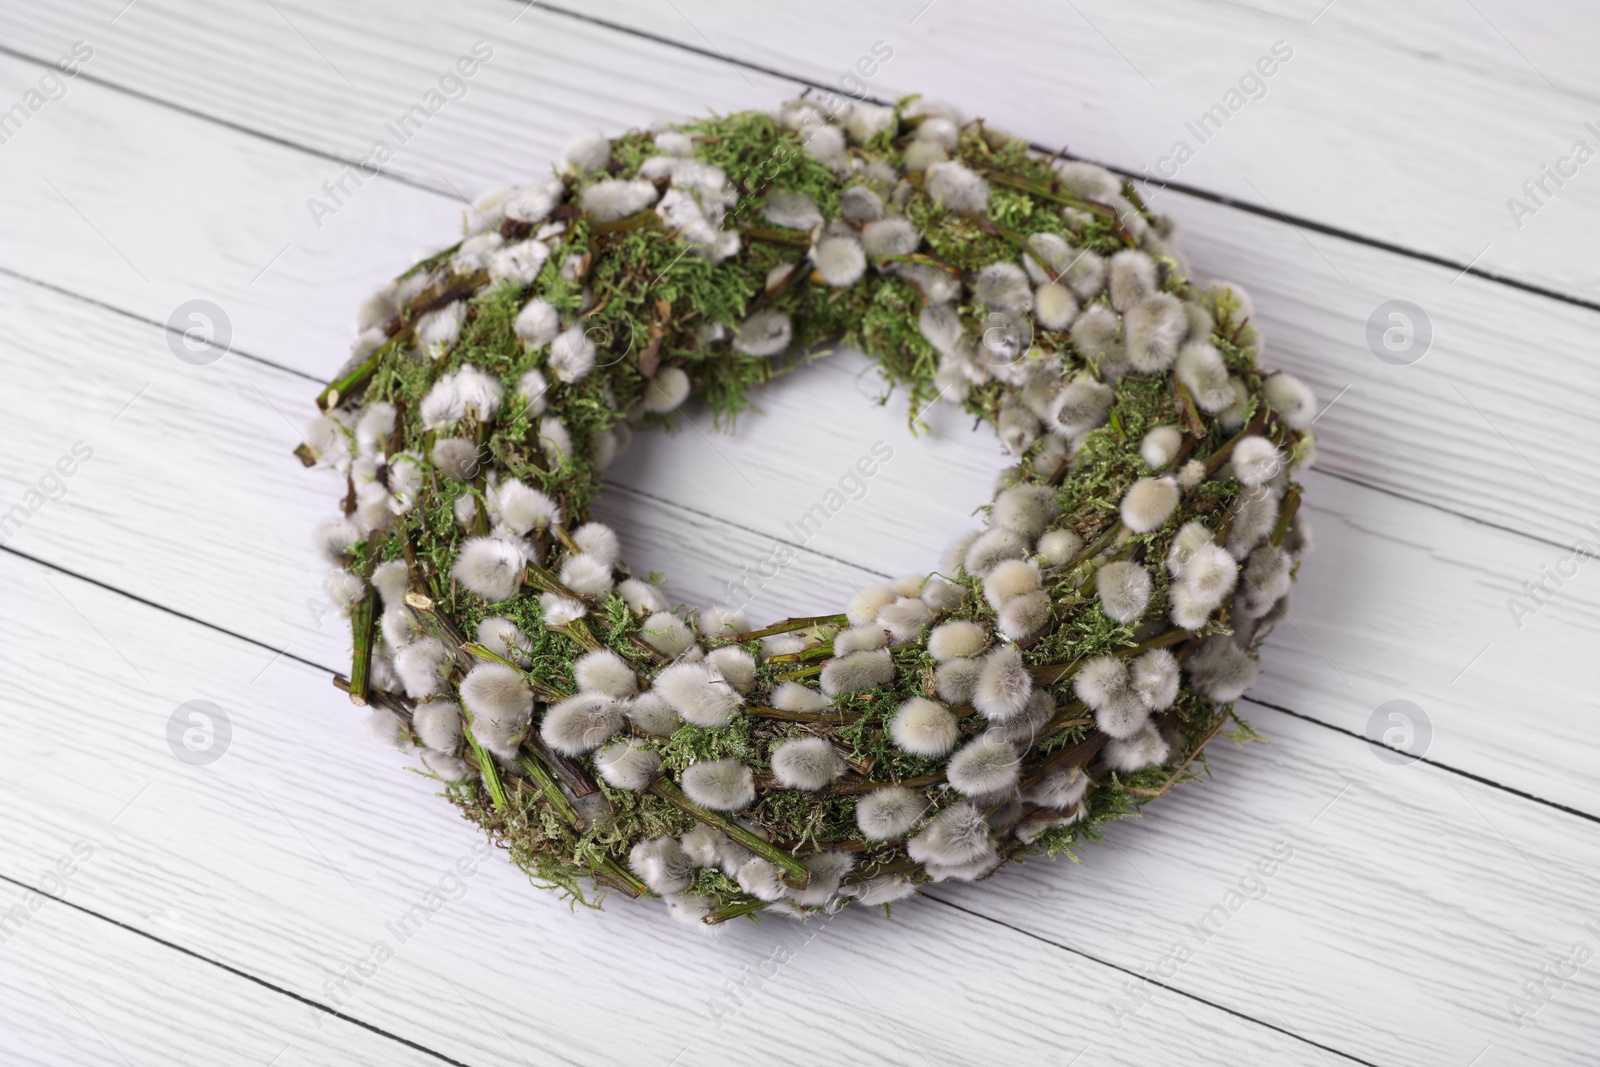 Photo of Wreath made of beautiful willow flowers on white wooden table